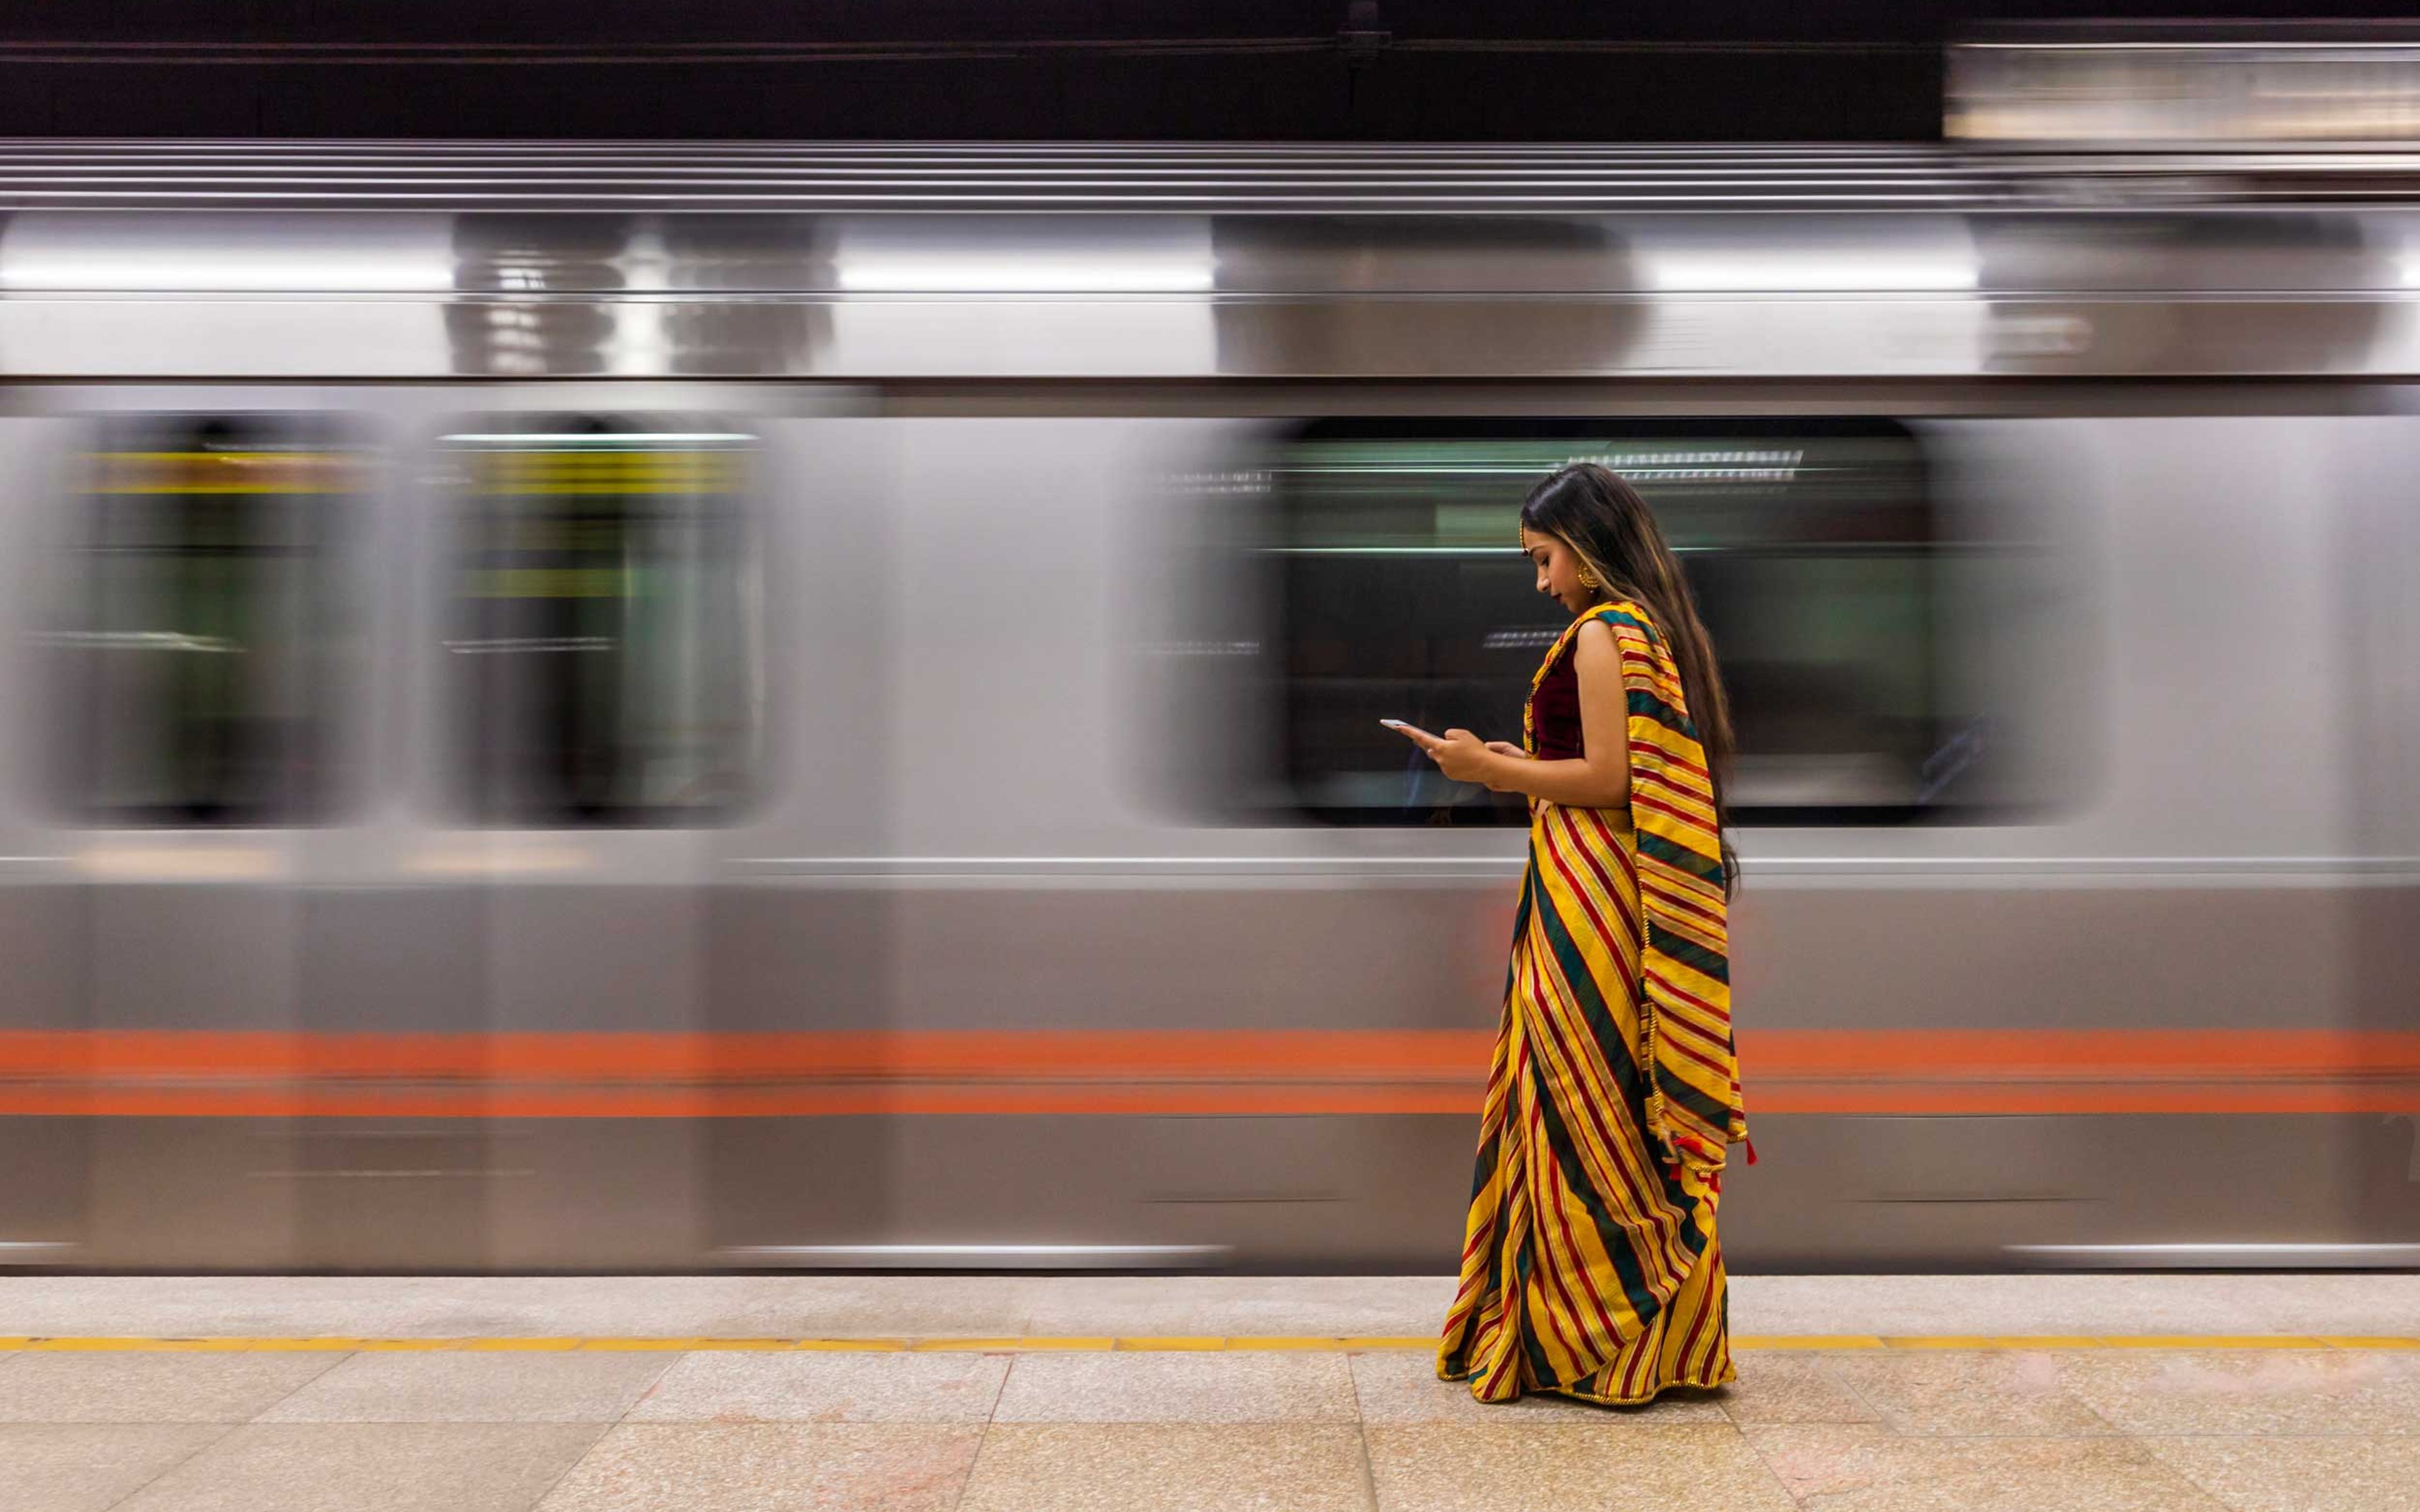 Young Indian woman waiting for a train at subway station in India.